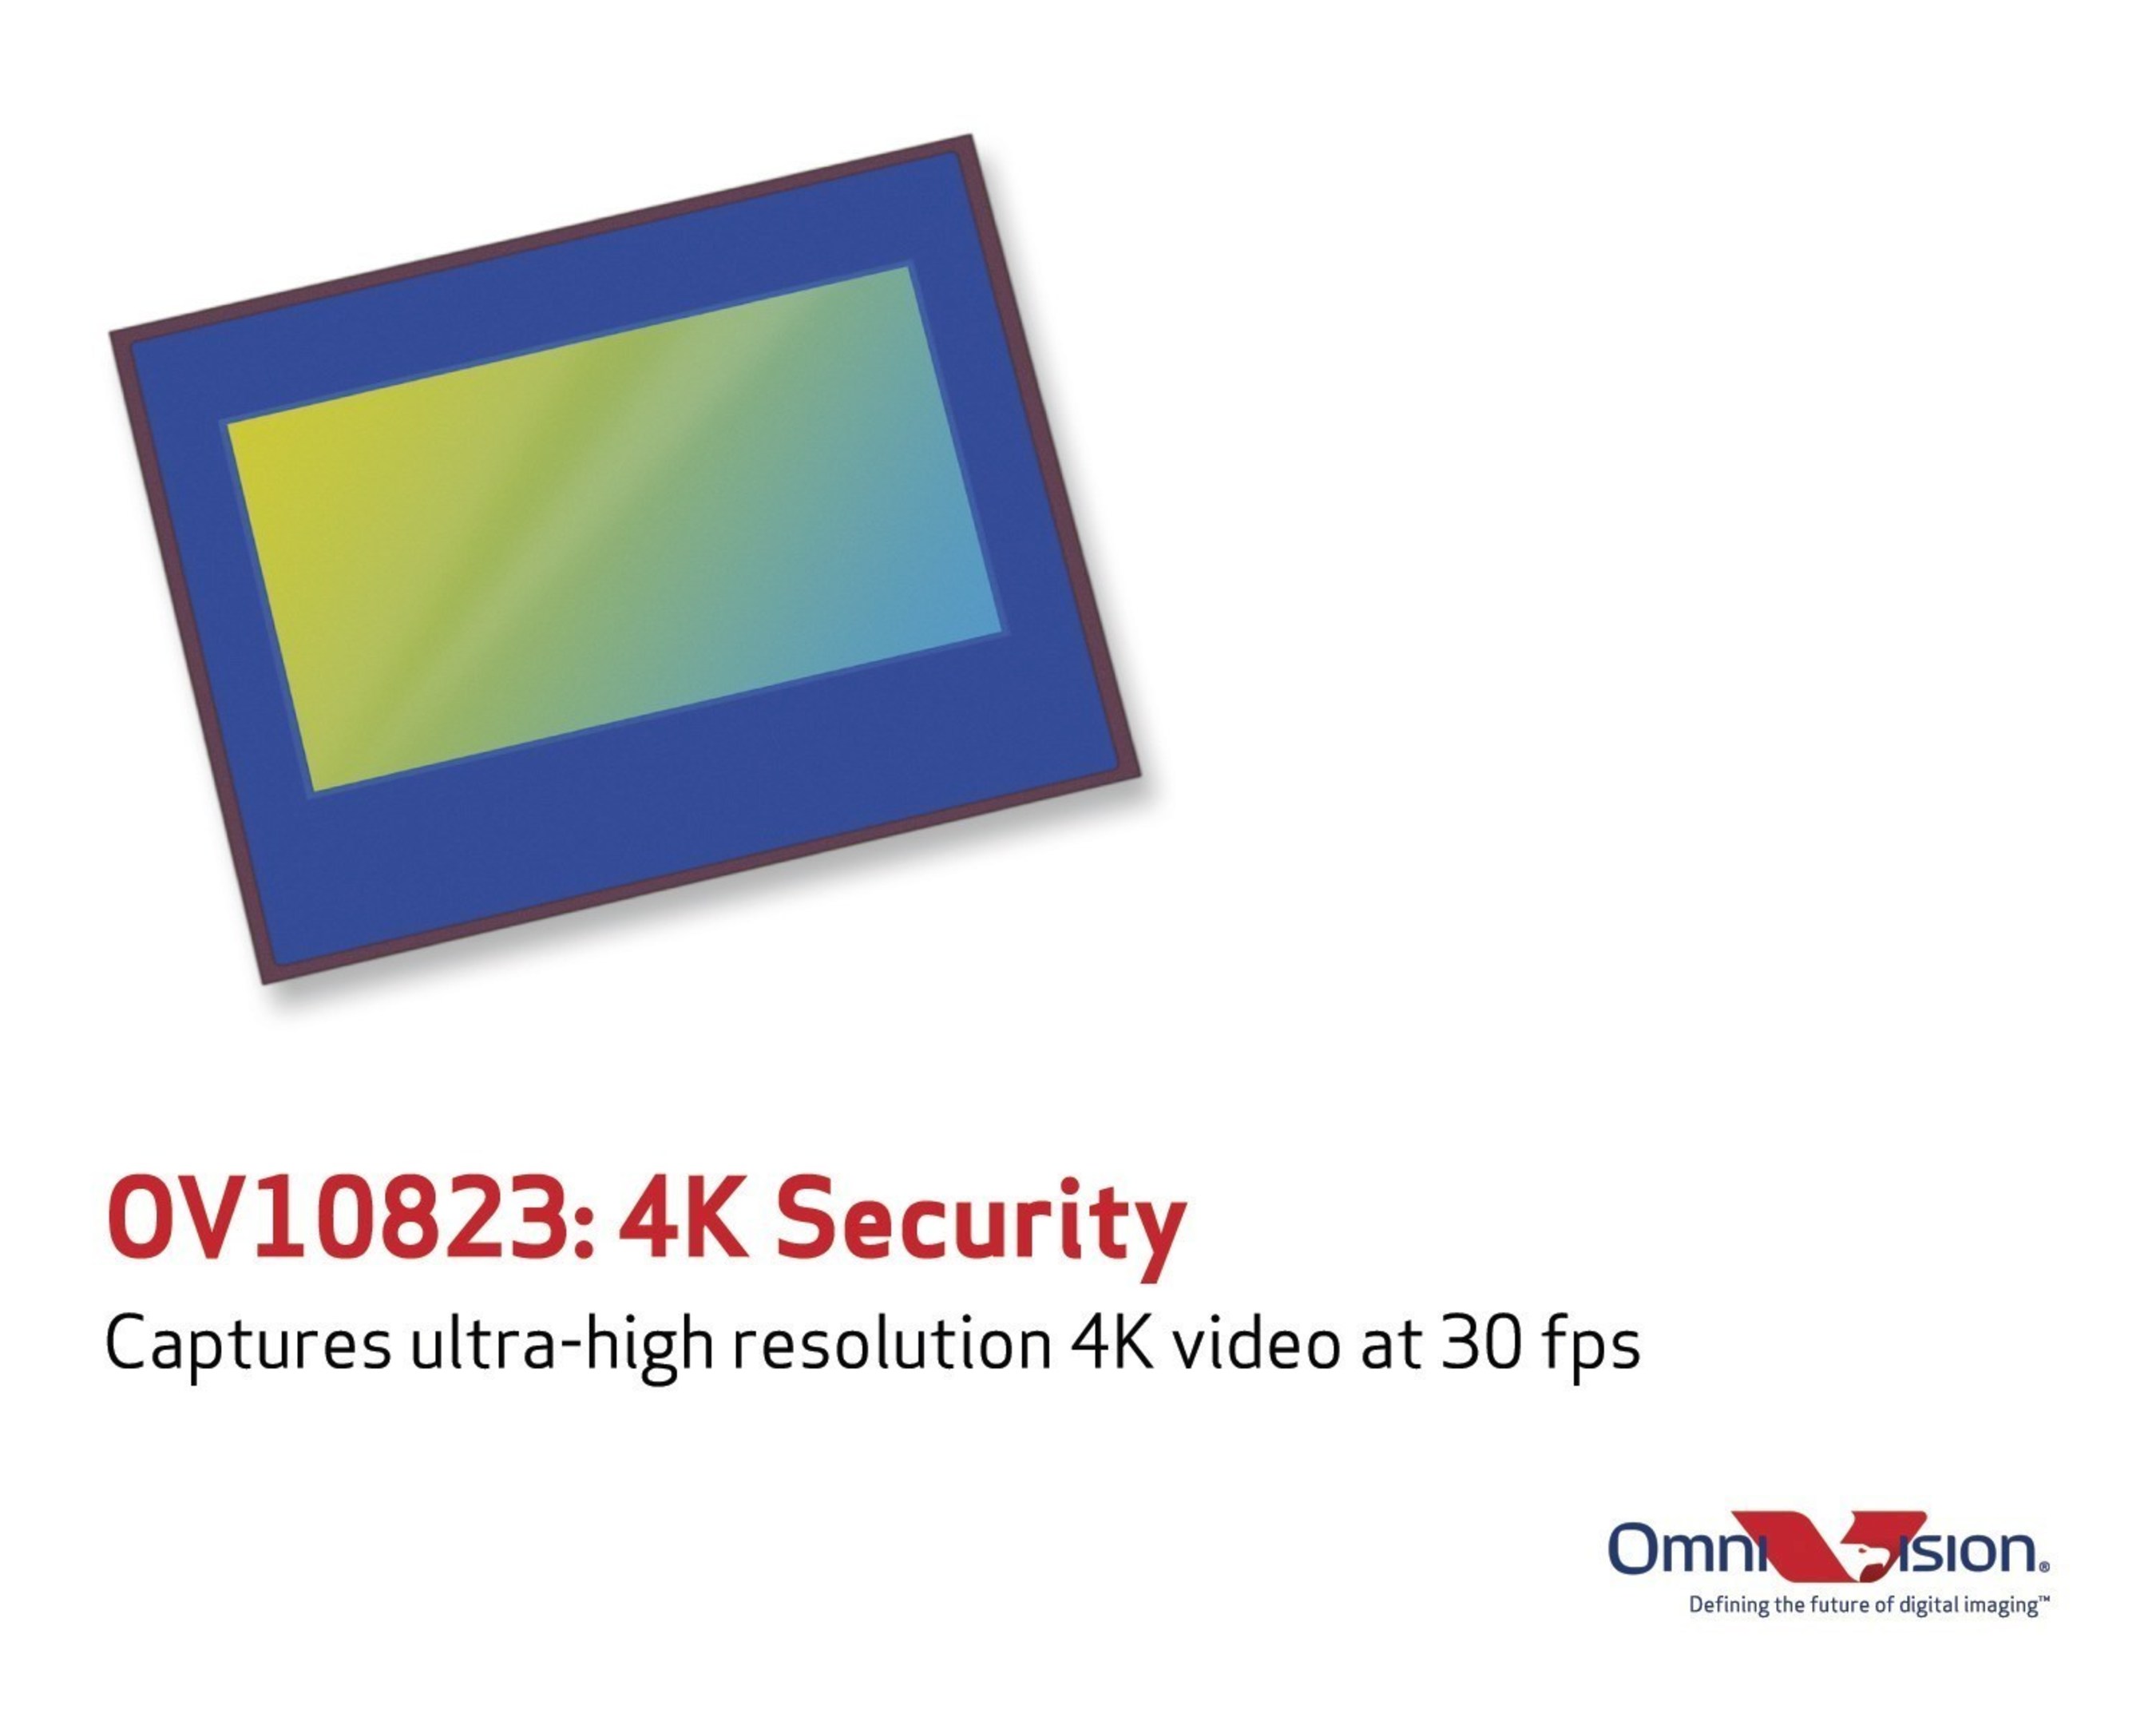 OmniVision's OV10823 enables 4K video capture and advanced security features such as automated tracking, zoom, and video analytics.